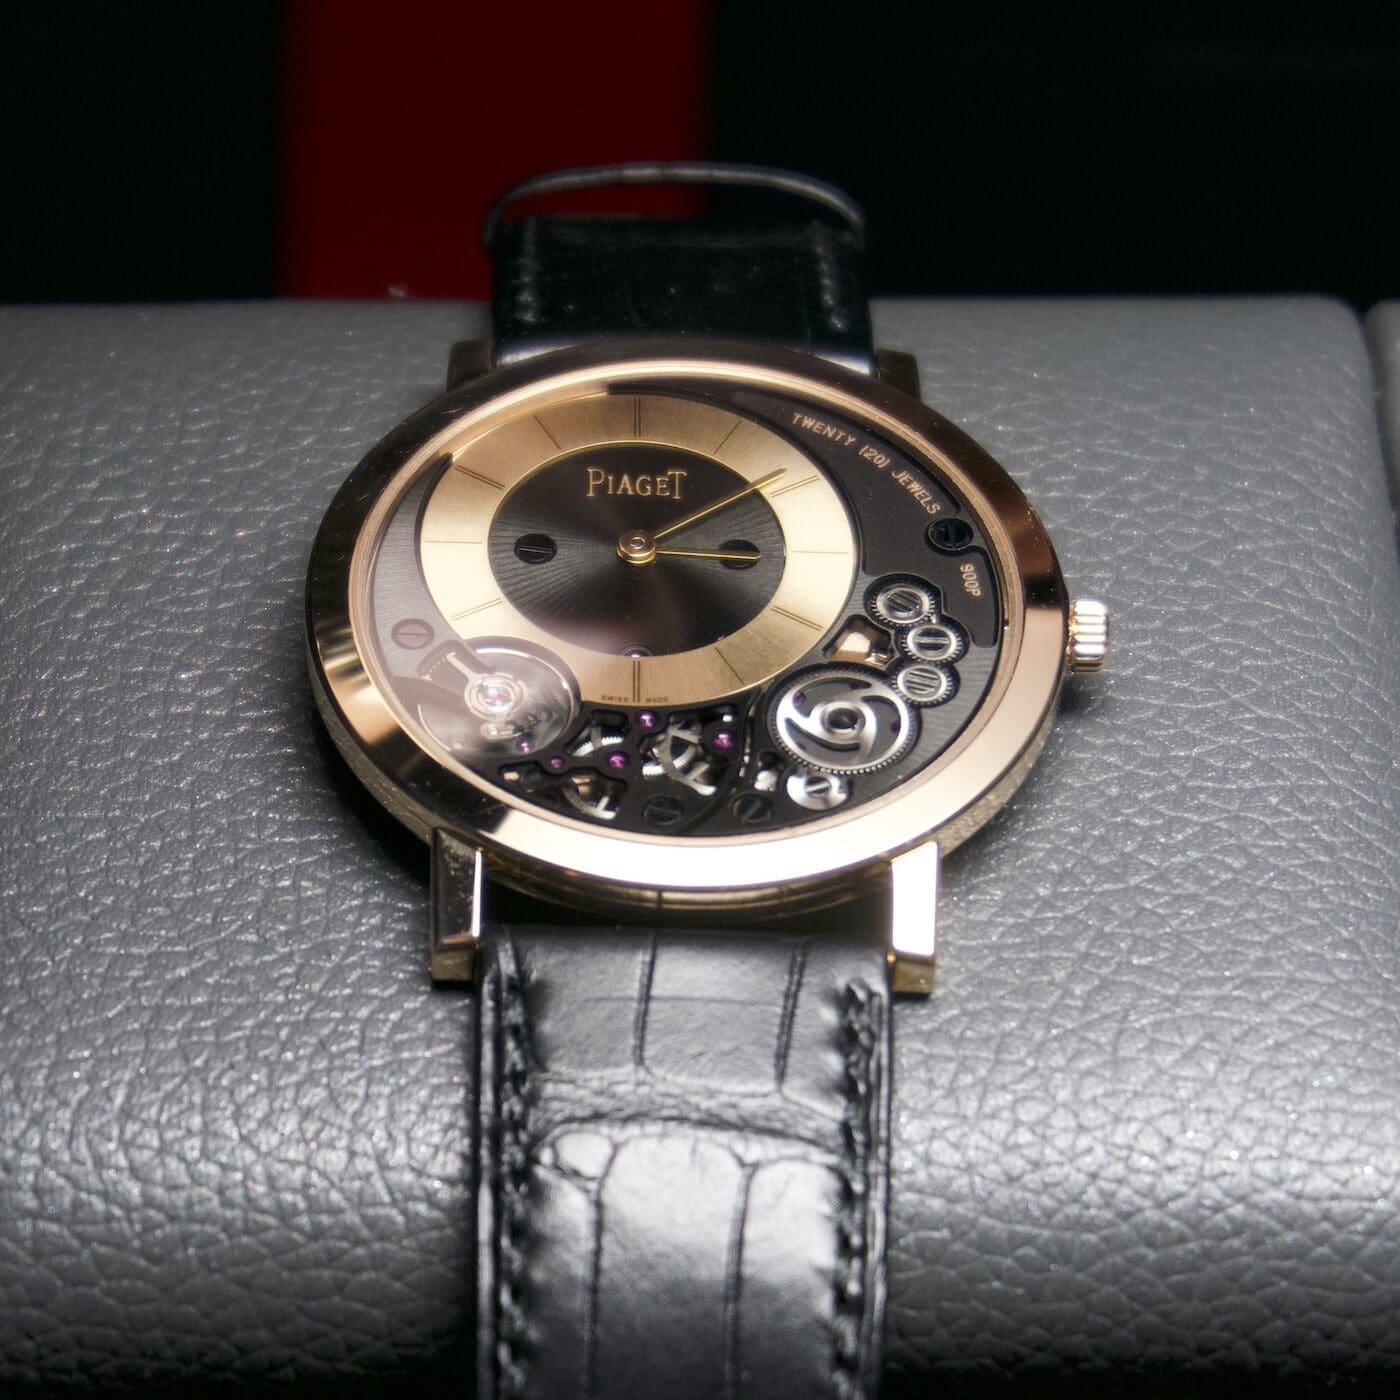 TRADING FACES: Why I just gave up five Kurono watches for this one Piaget